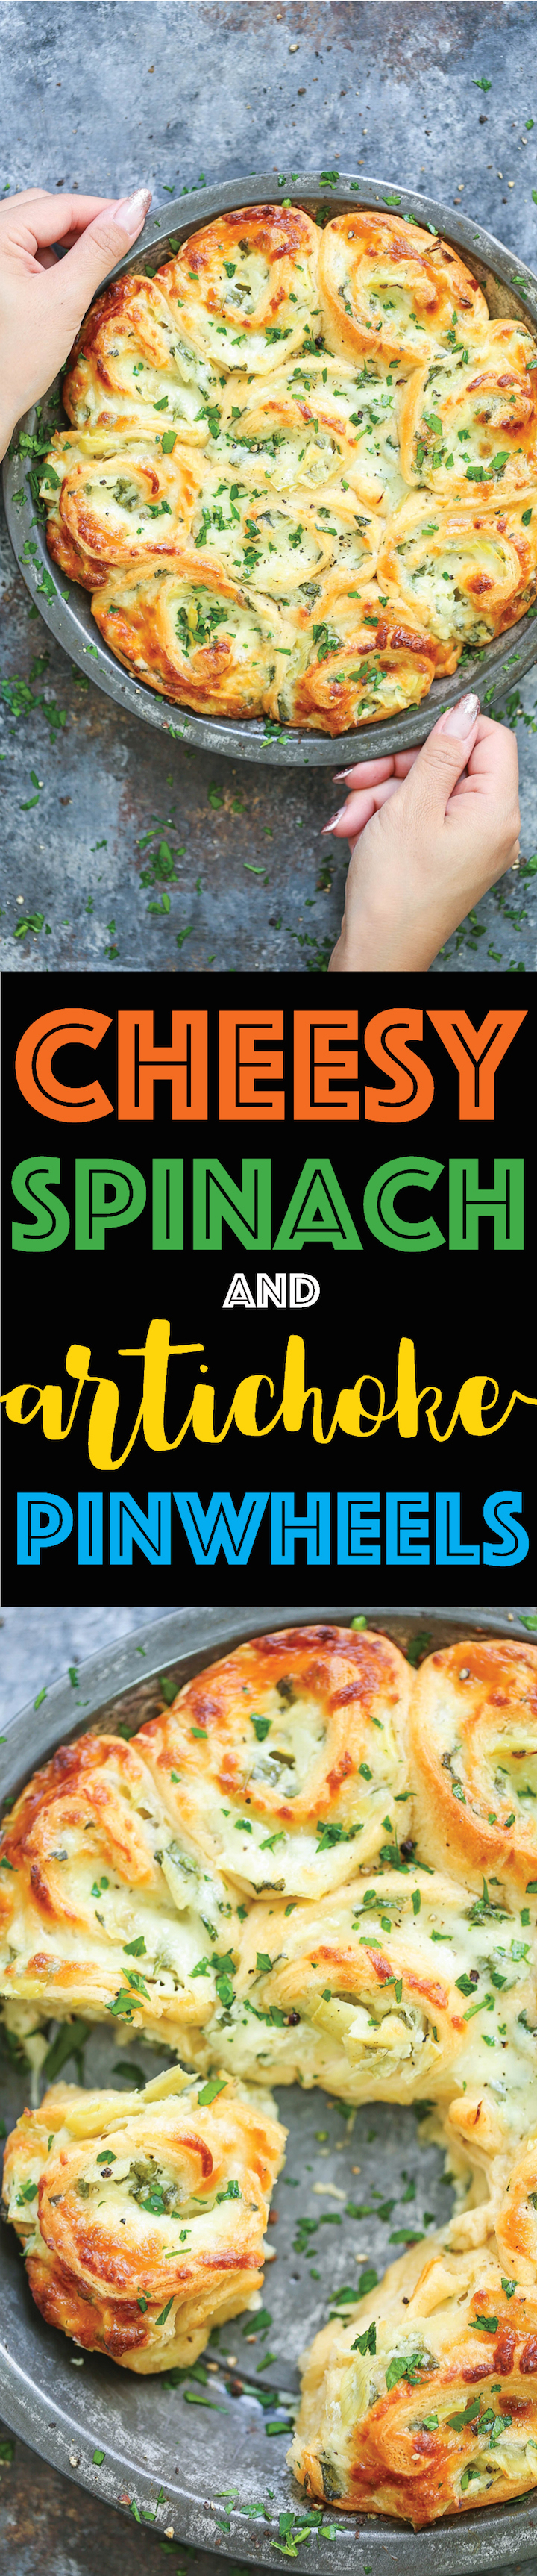 Cheesy Spinach and Artichoke Pinwheels - Everyone's favorite spinach and artichoke dip in these cheesy, creamy BAKED roll ups!!! So good for GAME DAY!!!